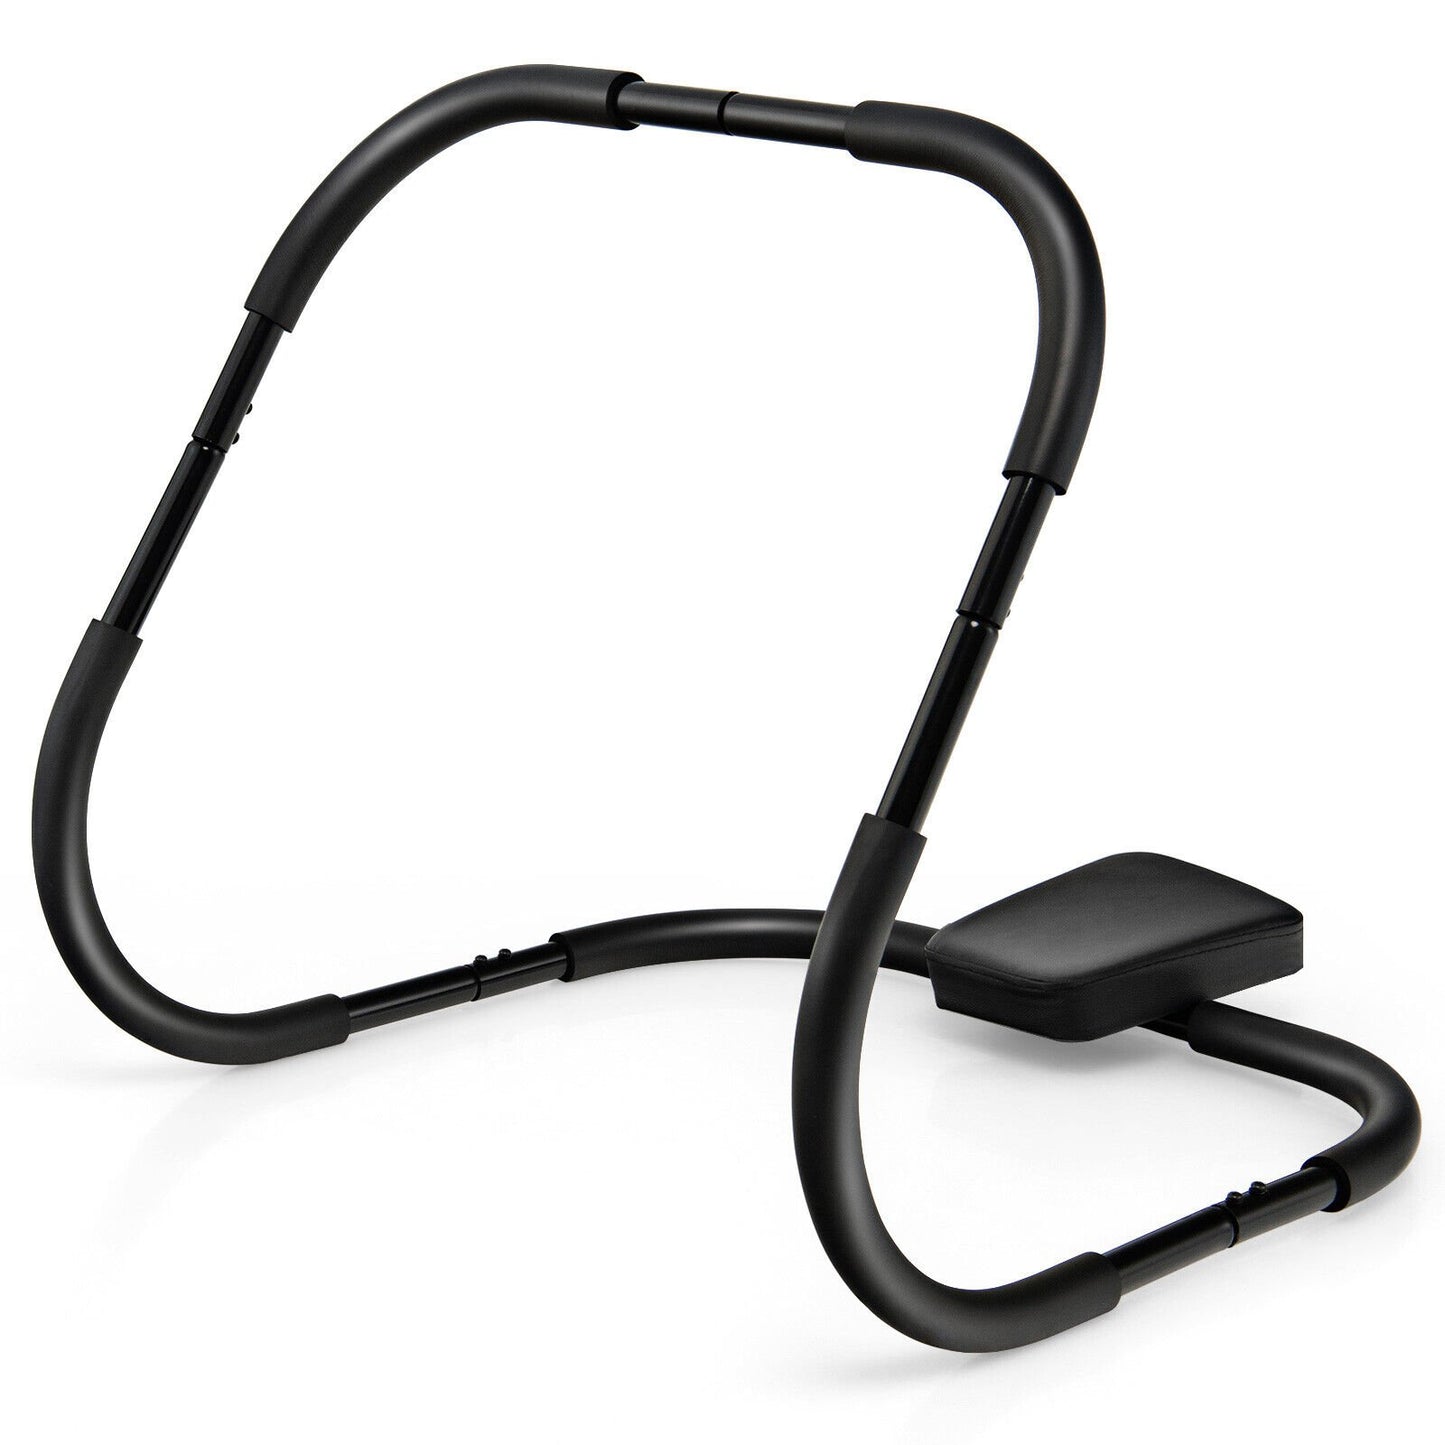 Portable AB Trainer Fitness Crunch Workout Exerciser with Headrest, Black